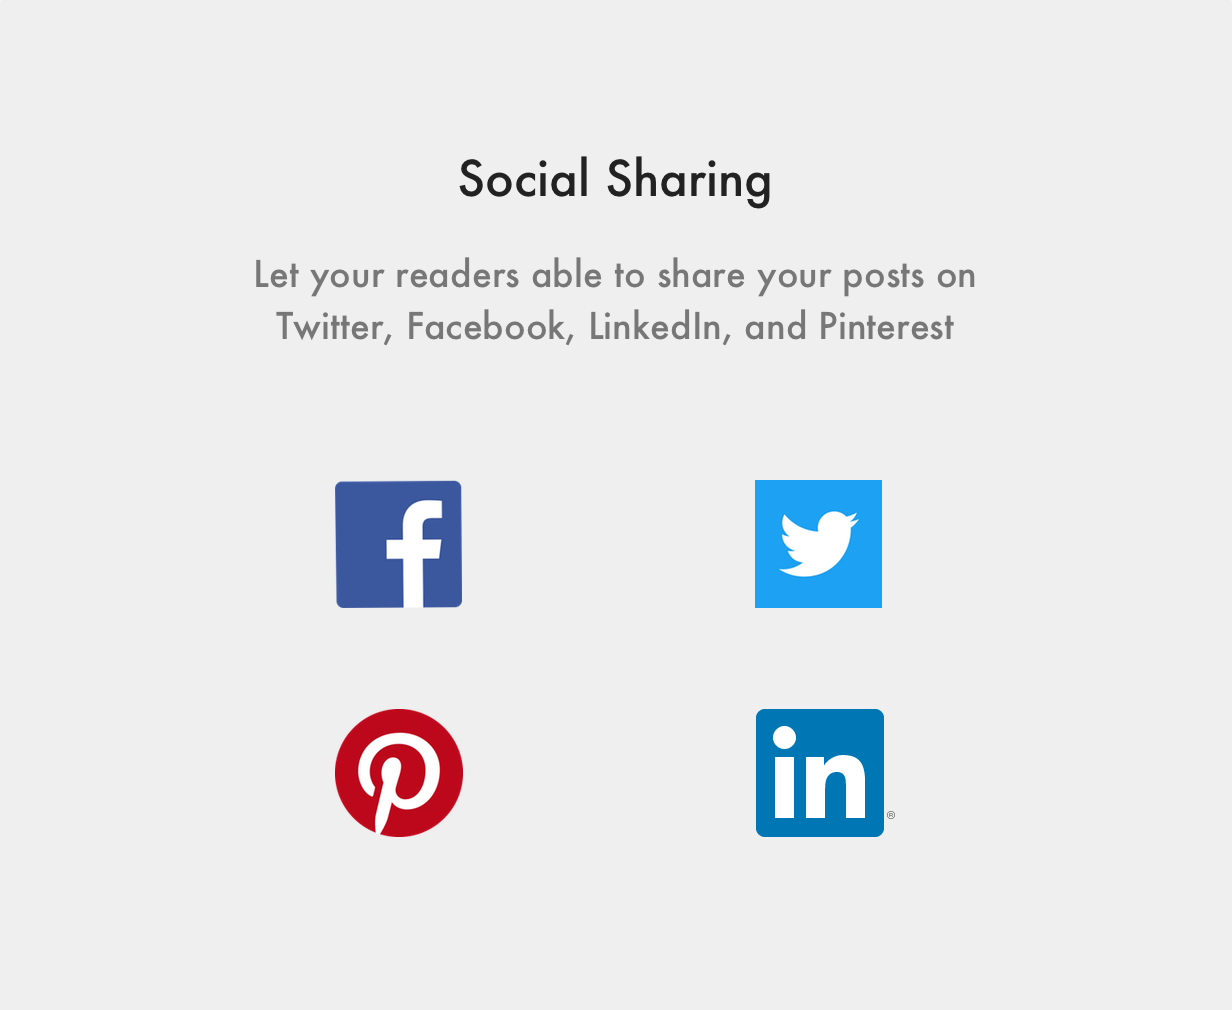 Nubia Ghost Theme Social Media Sharing (Twitter, Facebook, LinkedIn, and Pinterest)